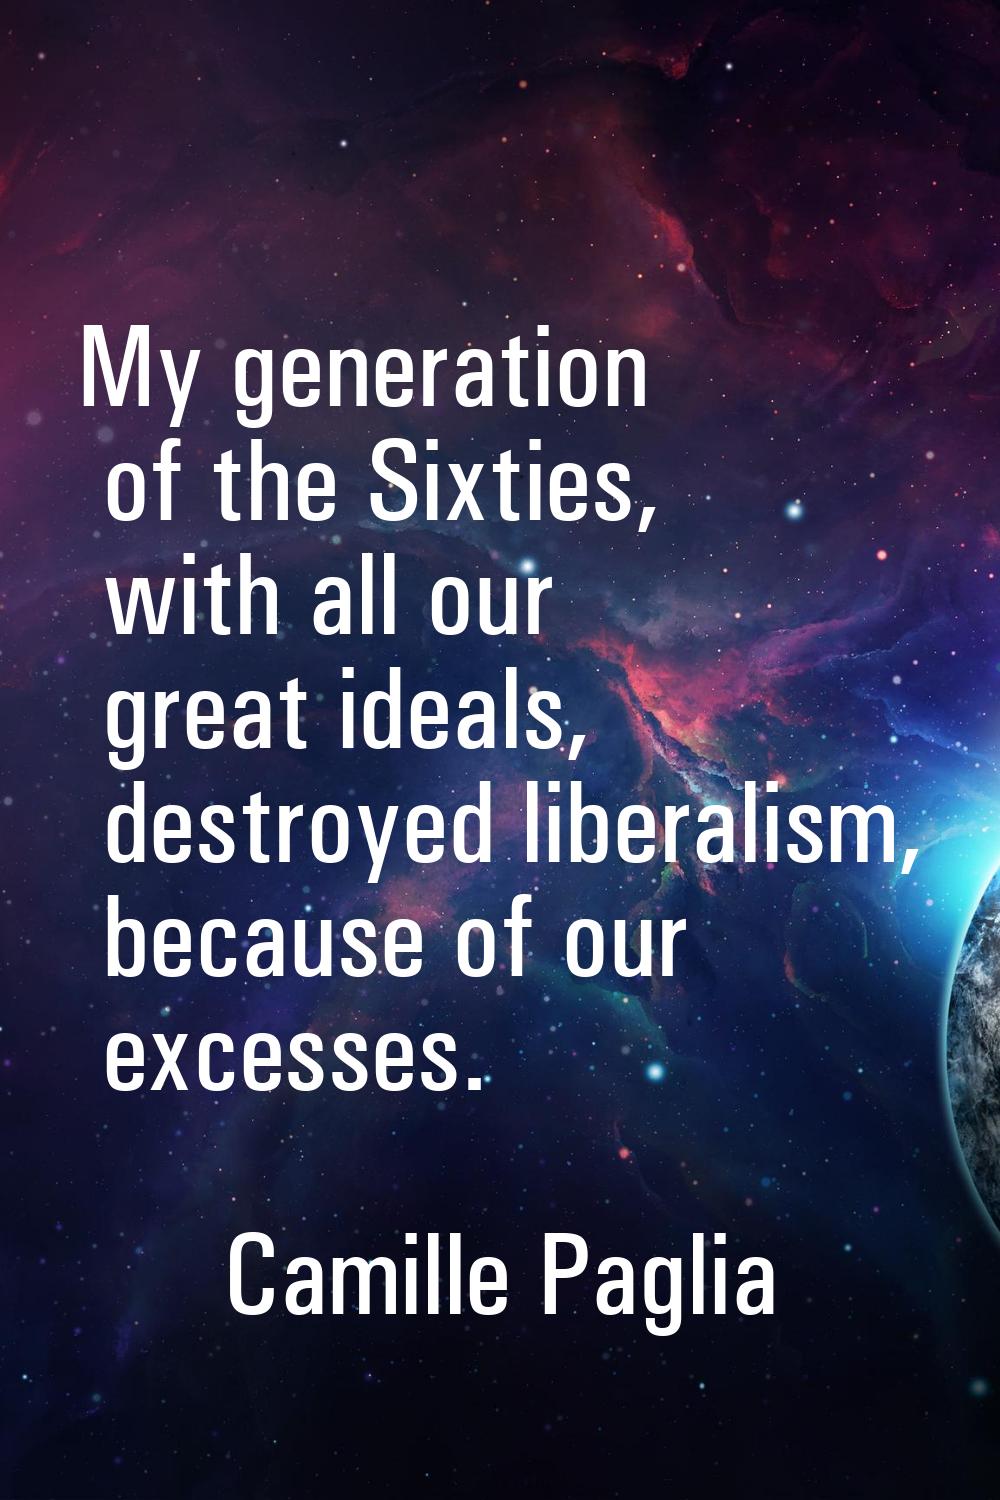 My generation of the Sixties, with all our great ideals, destroyed liberalism, because of our exces